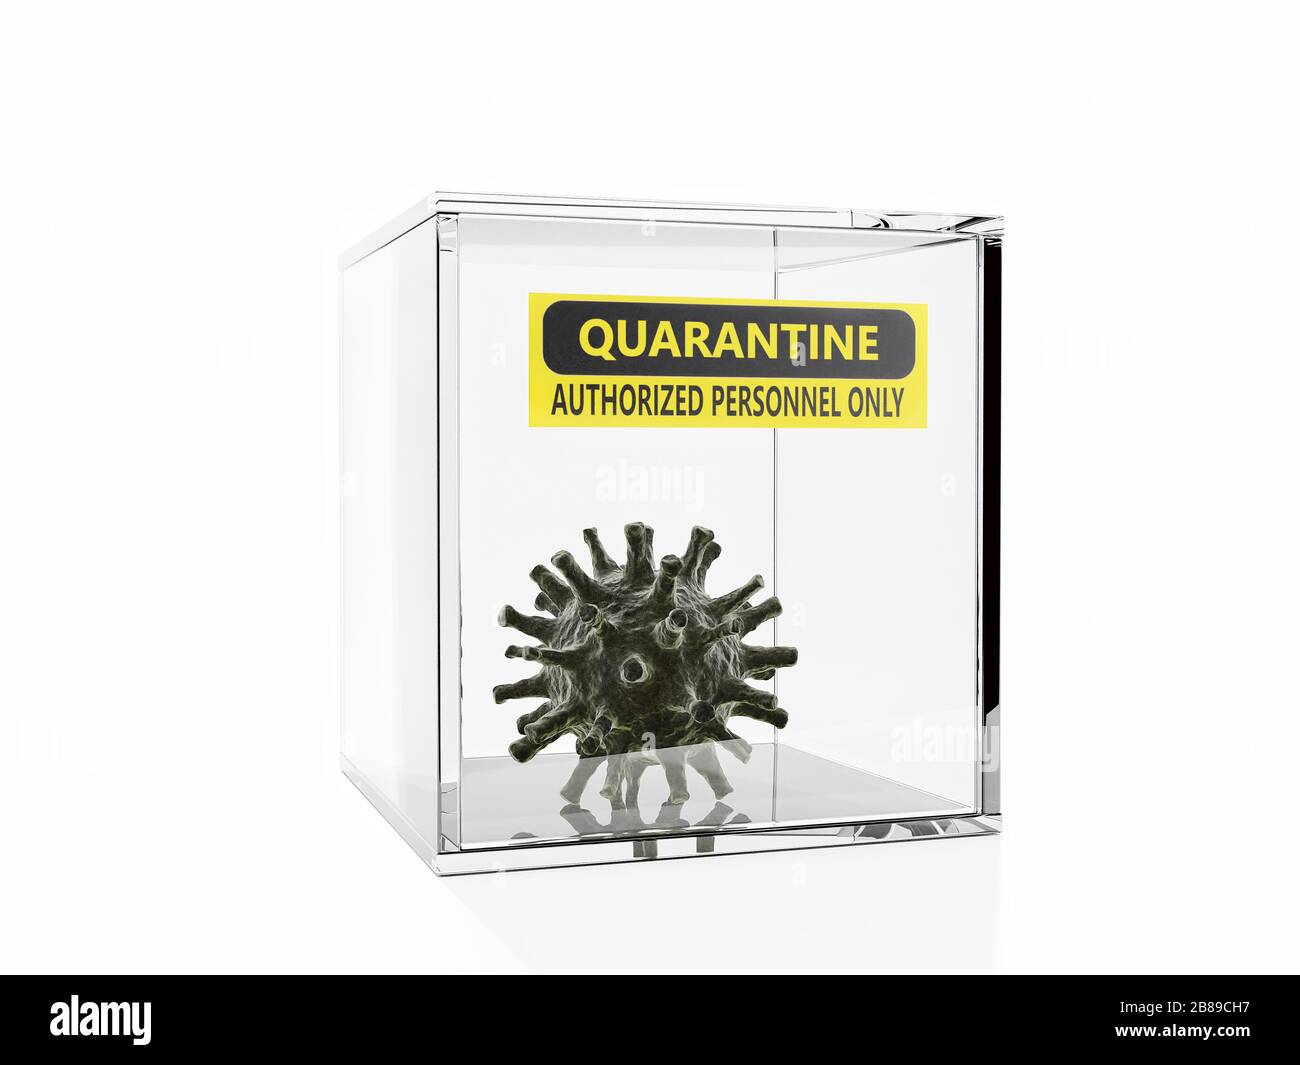 3D rendering of corona virus isolated in glass seclusion box with quarantine label Stock Photo